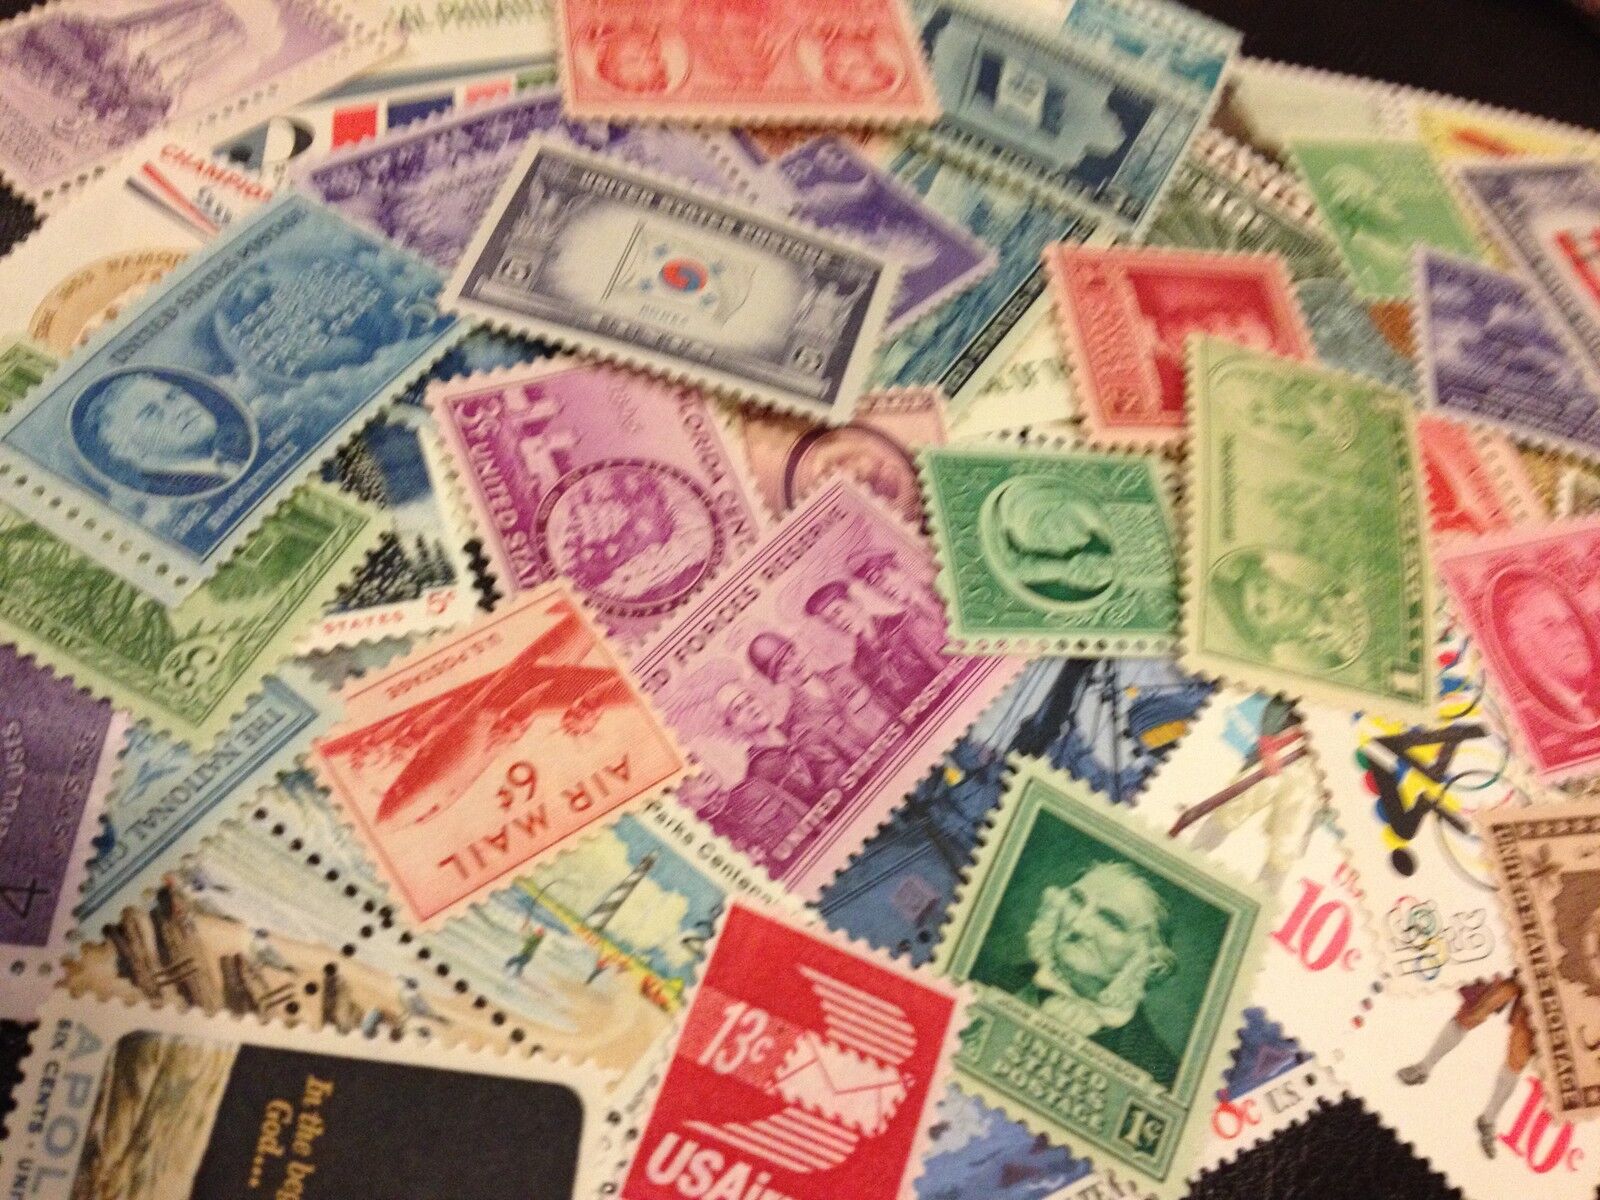 60 Unused US Stamps from 1930\'s to 60\'s including World War 2 era stamps